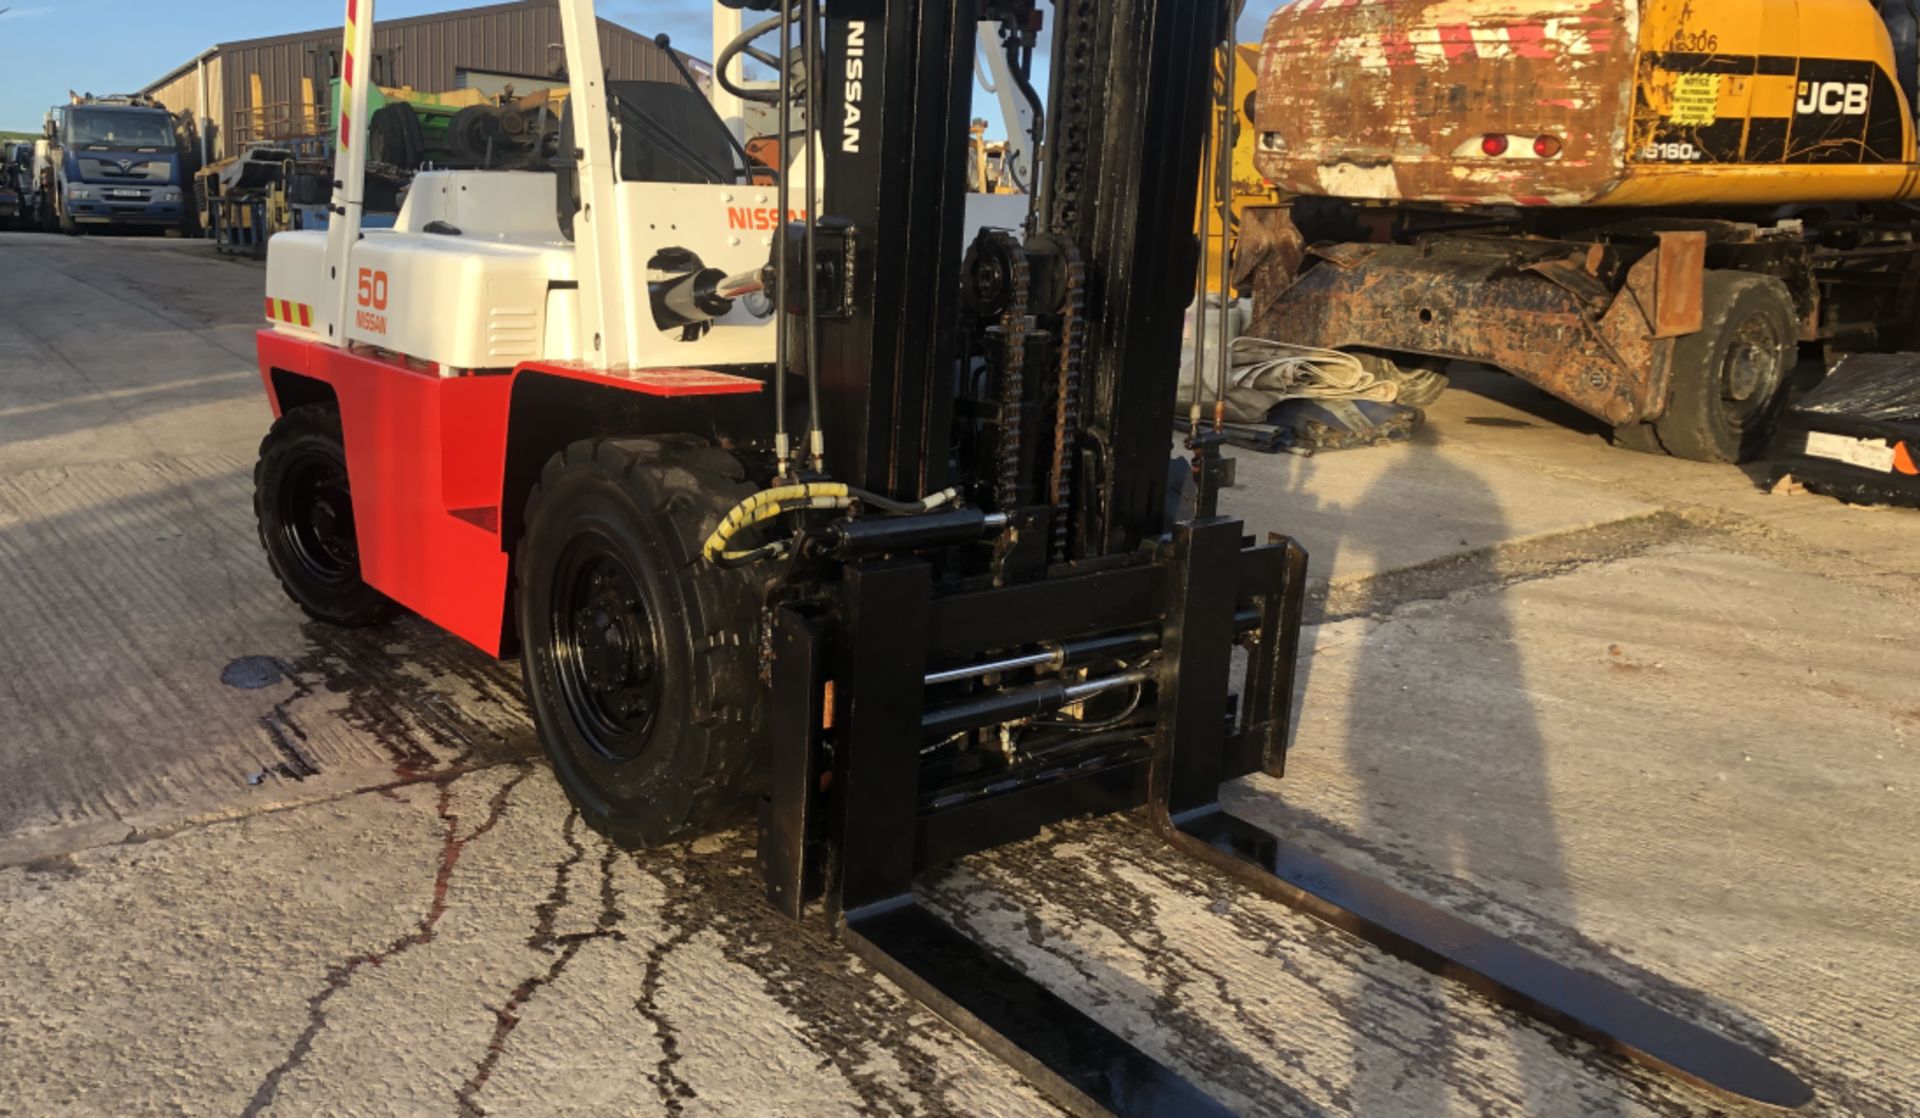 NISSAN FD50,5 TON DIESEL CONTAINER SPEC FORKLIFT - Image 7 of 10